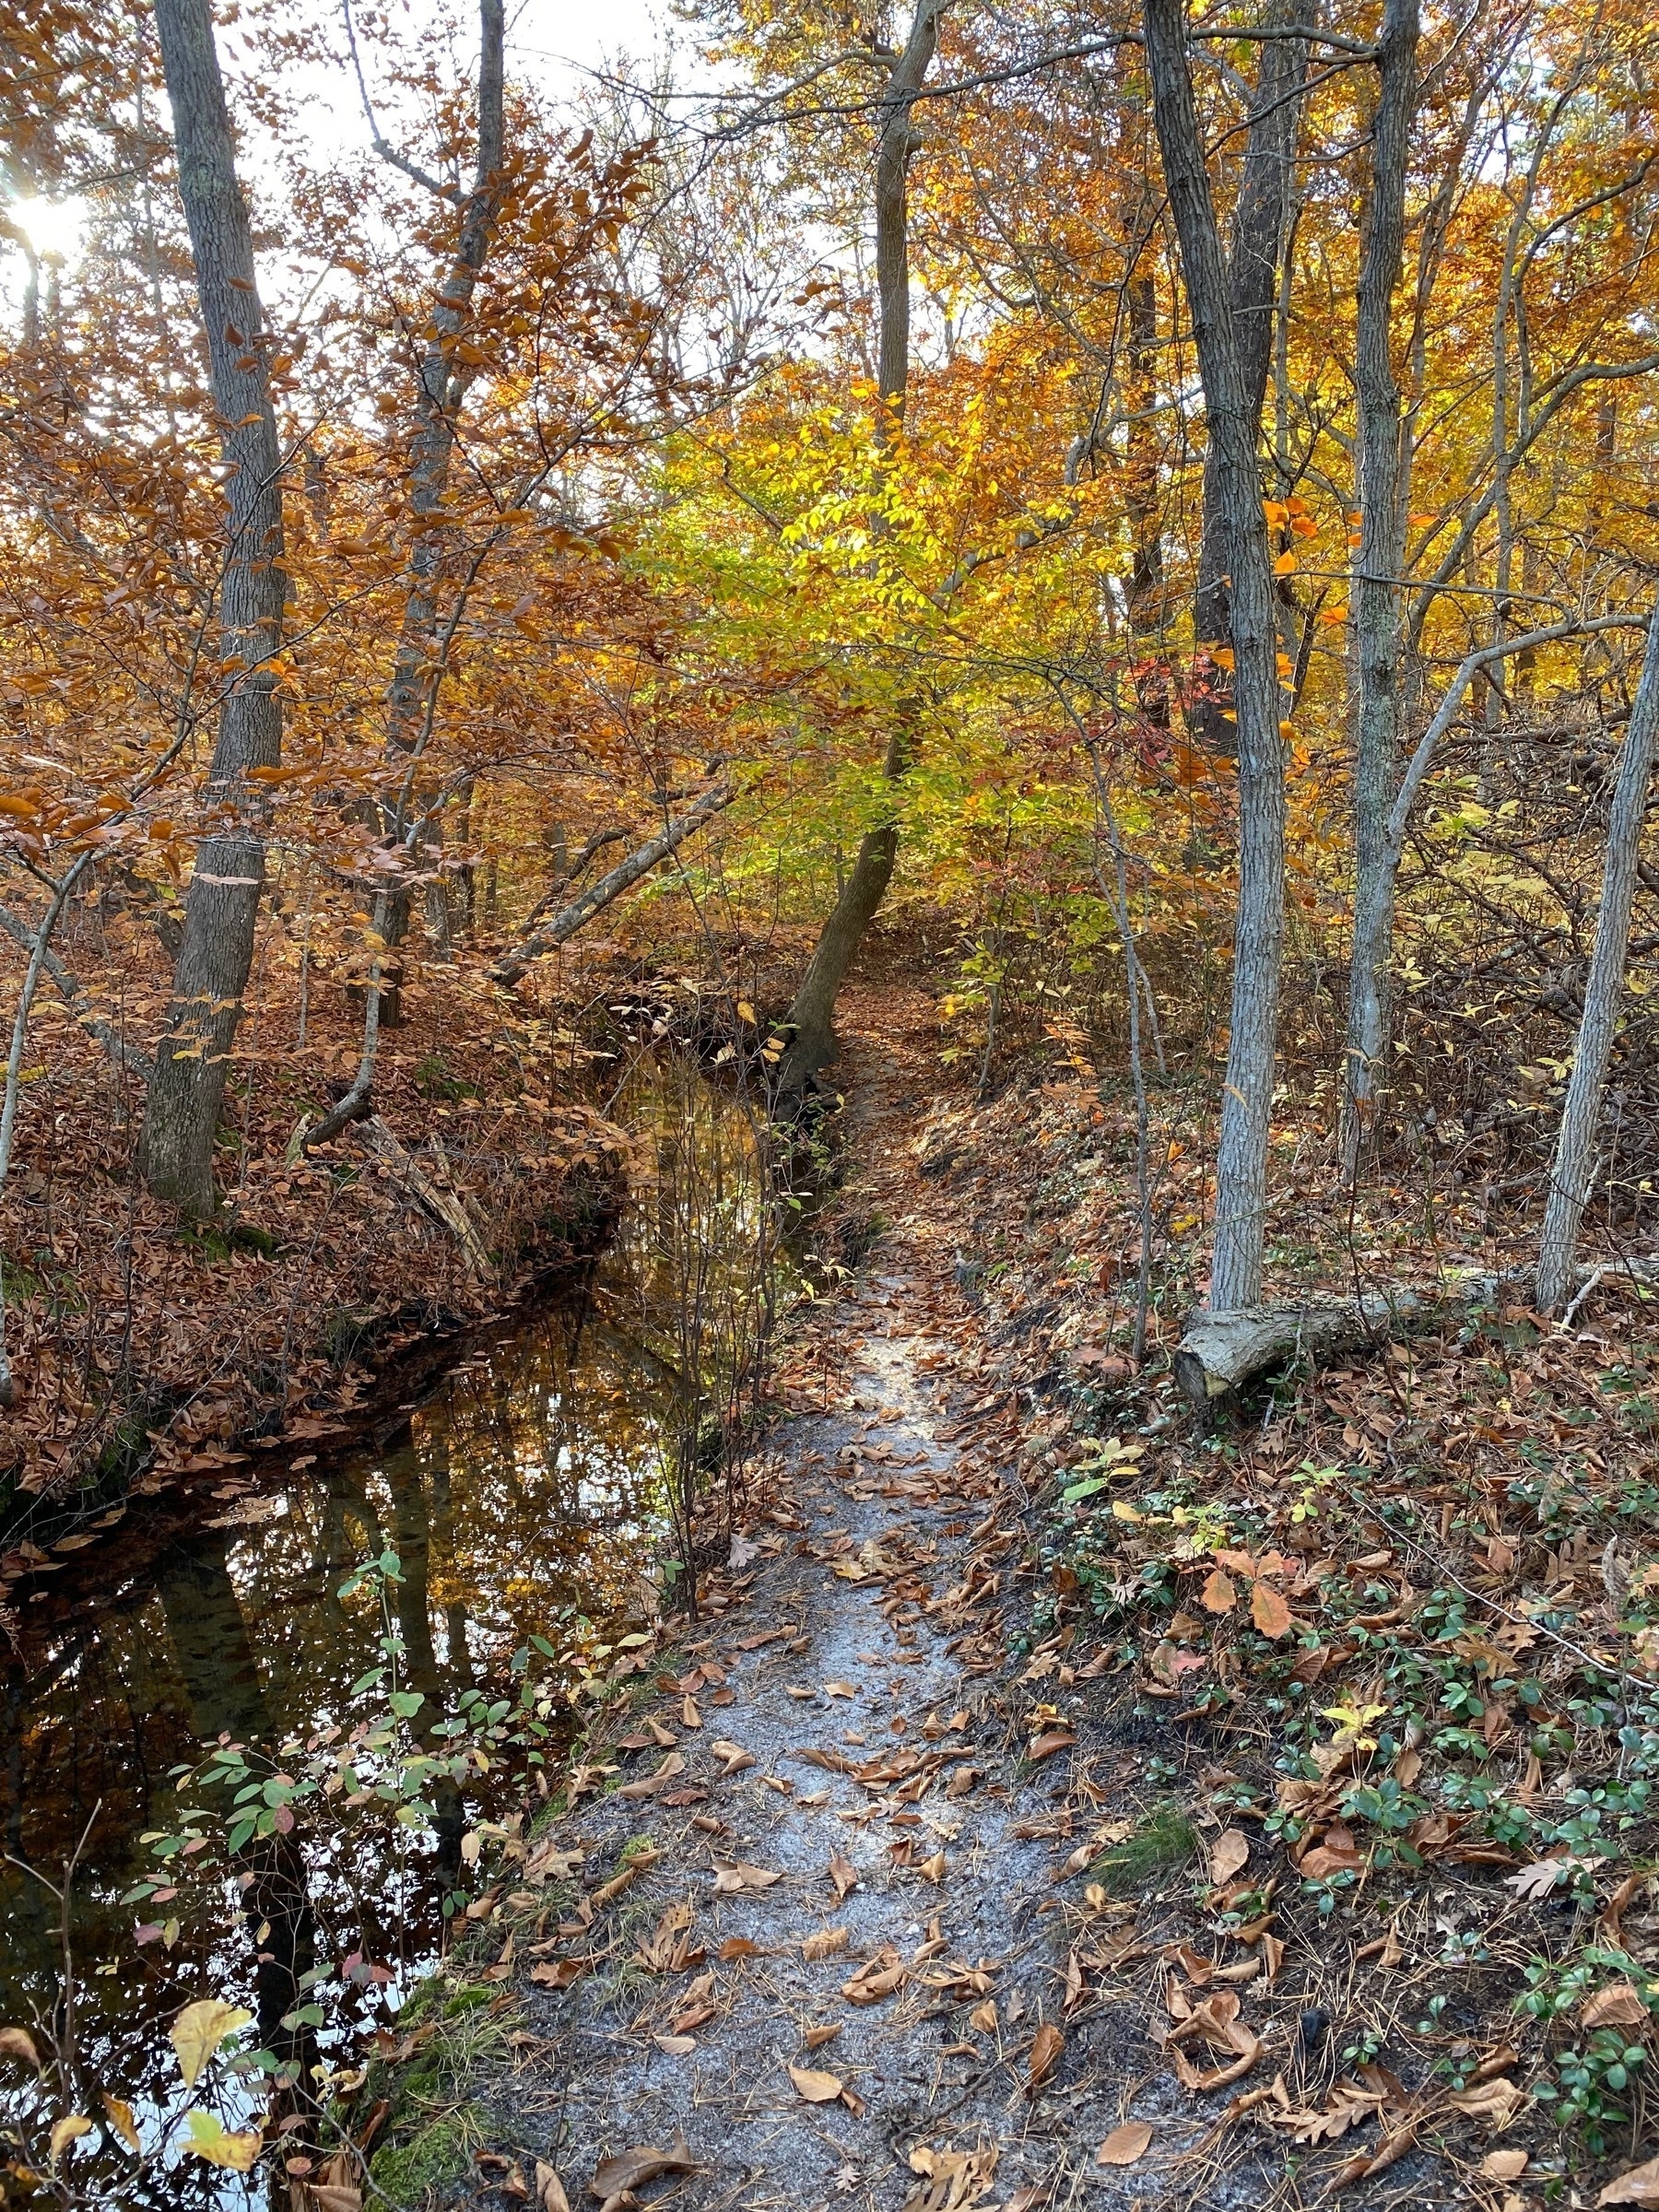 A small stream with fall foliage on both banks and many leaves floating in the water.